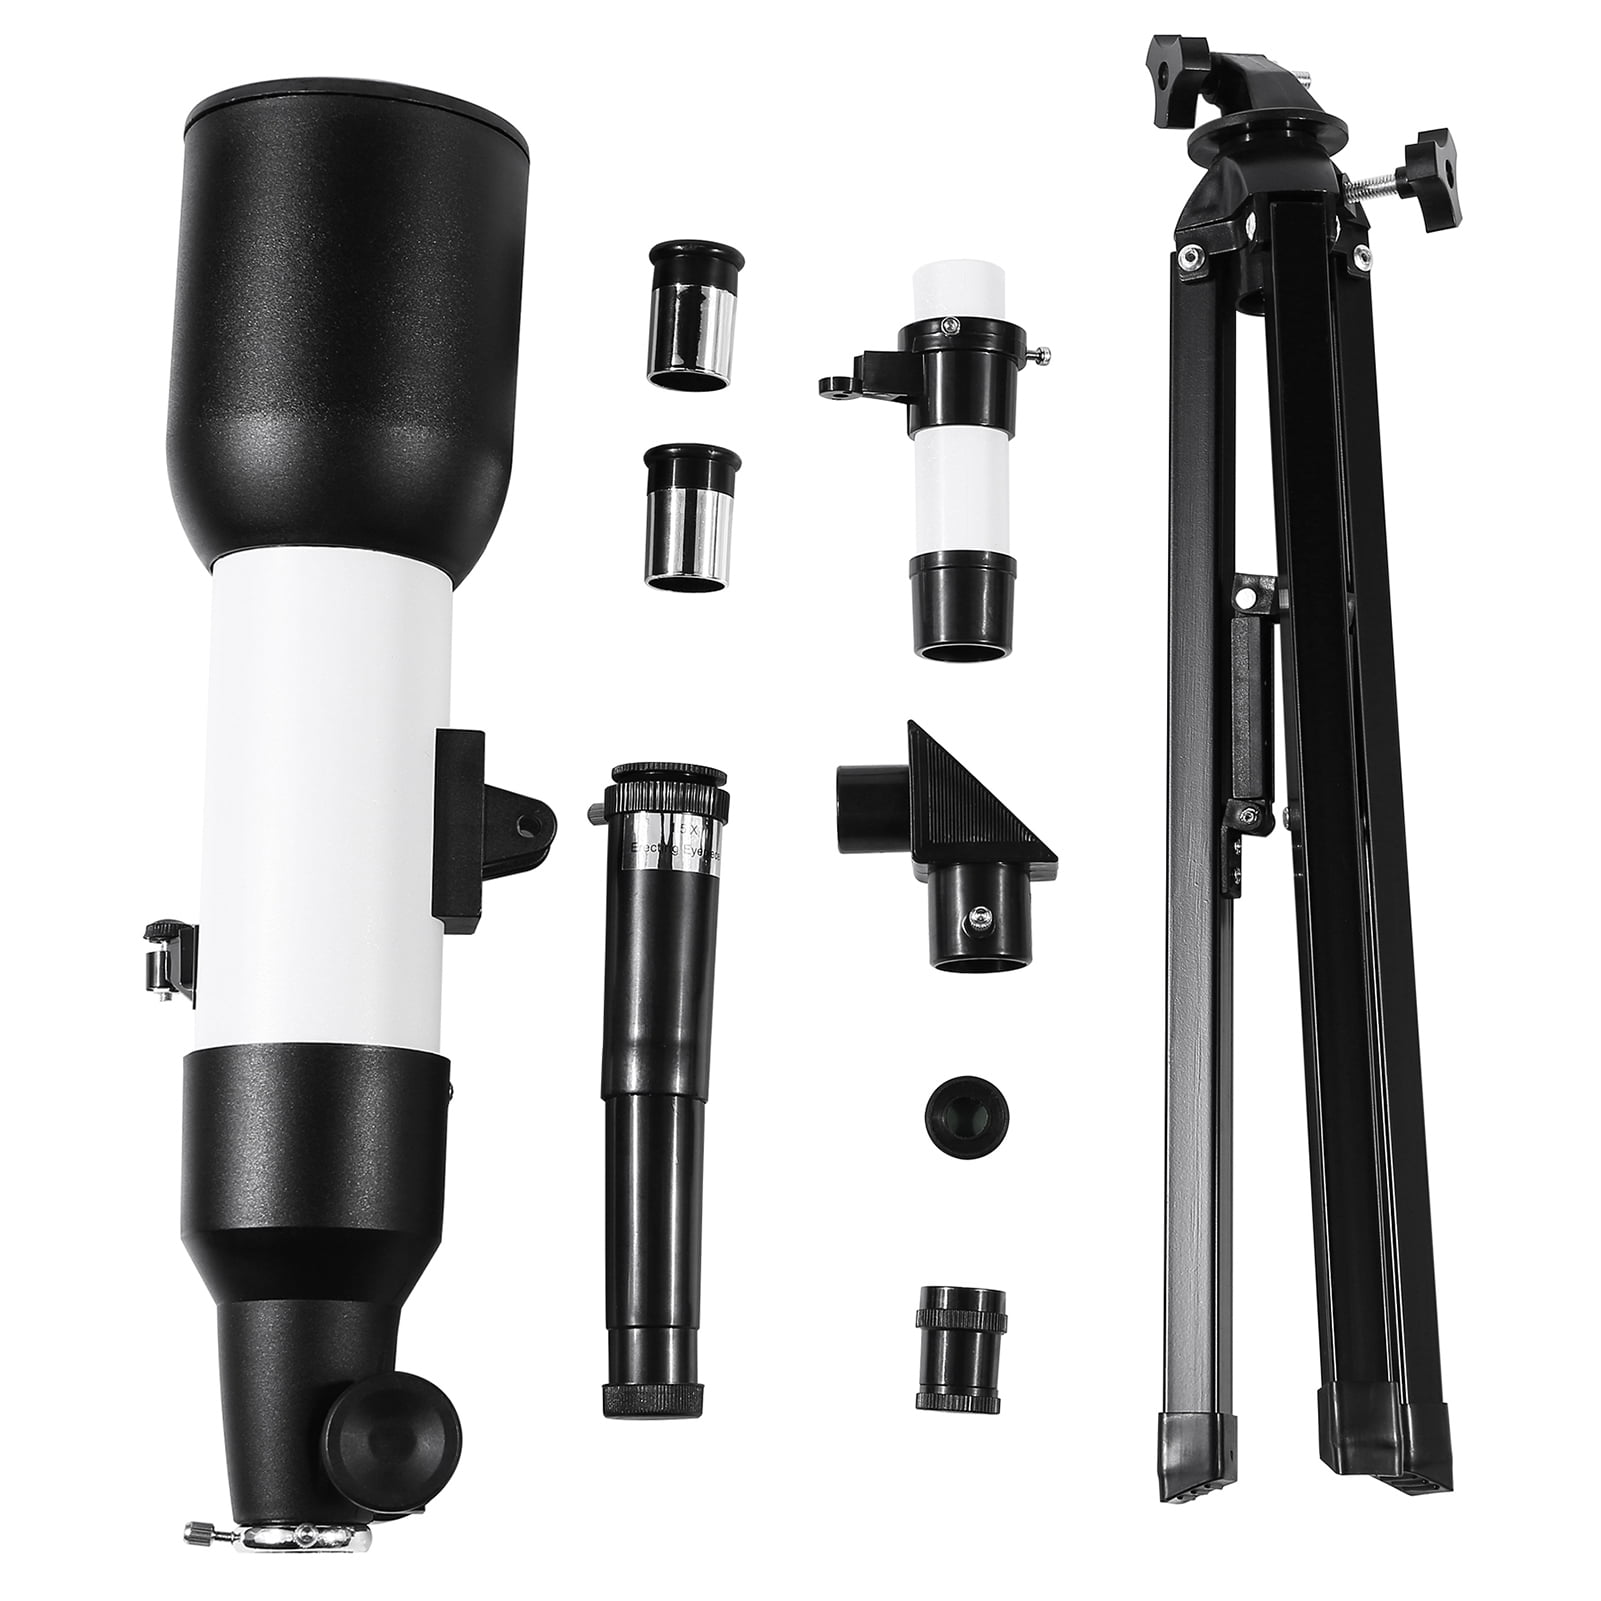 Roeam Astronomical Refracting Telescope Monocular Outdoor Travel Spotting Scope with Tripod for Kids Beginners Gift